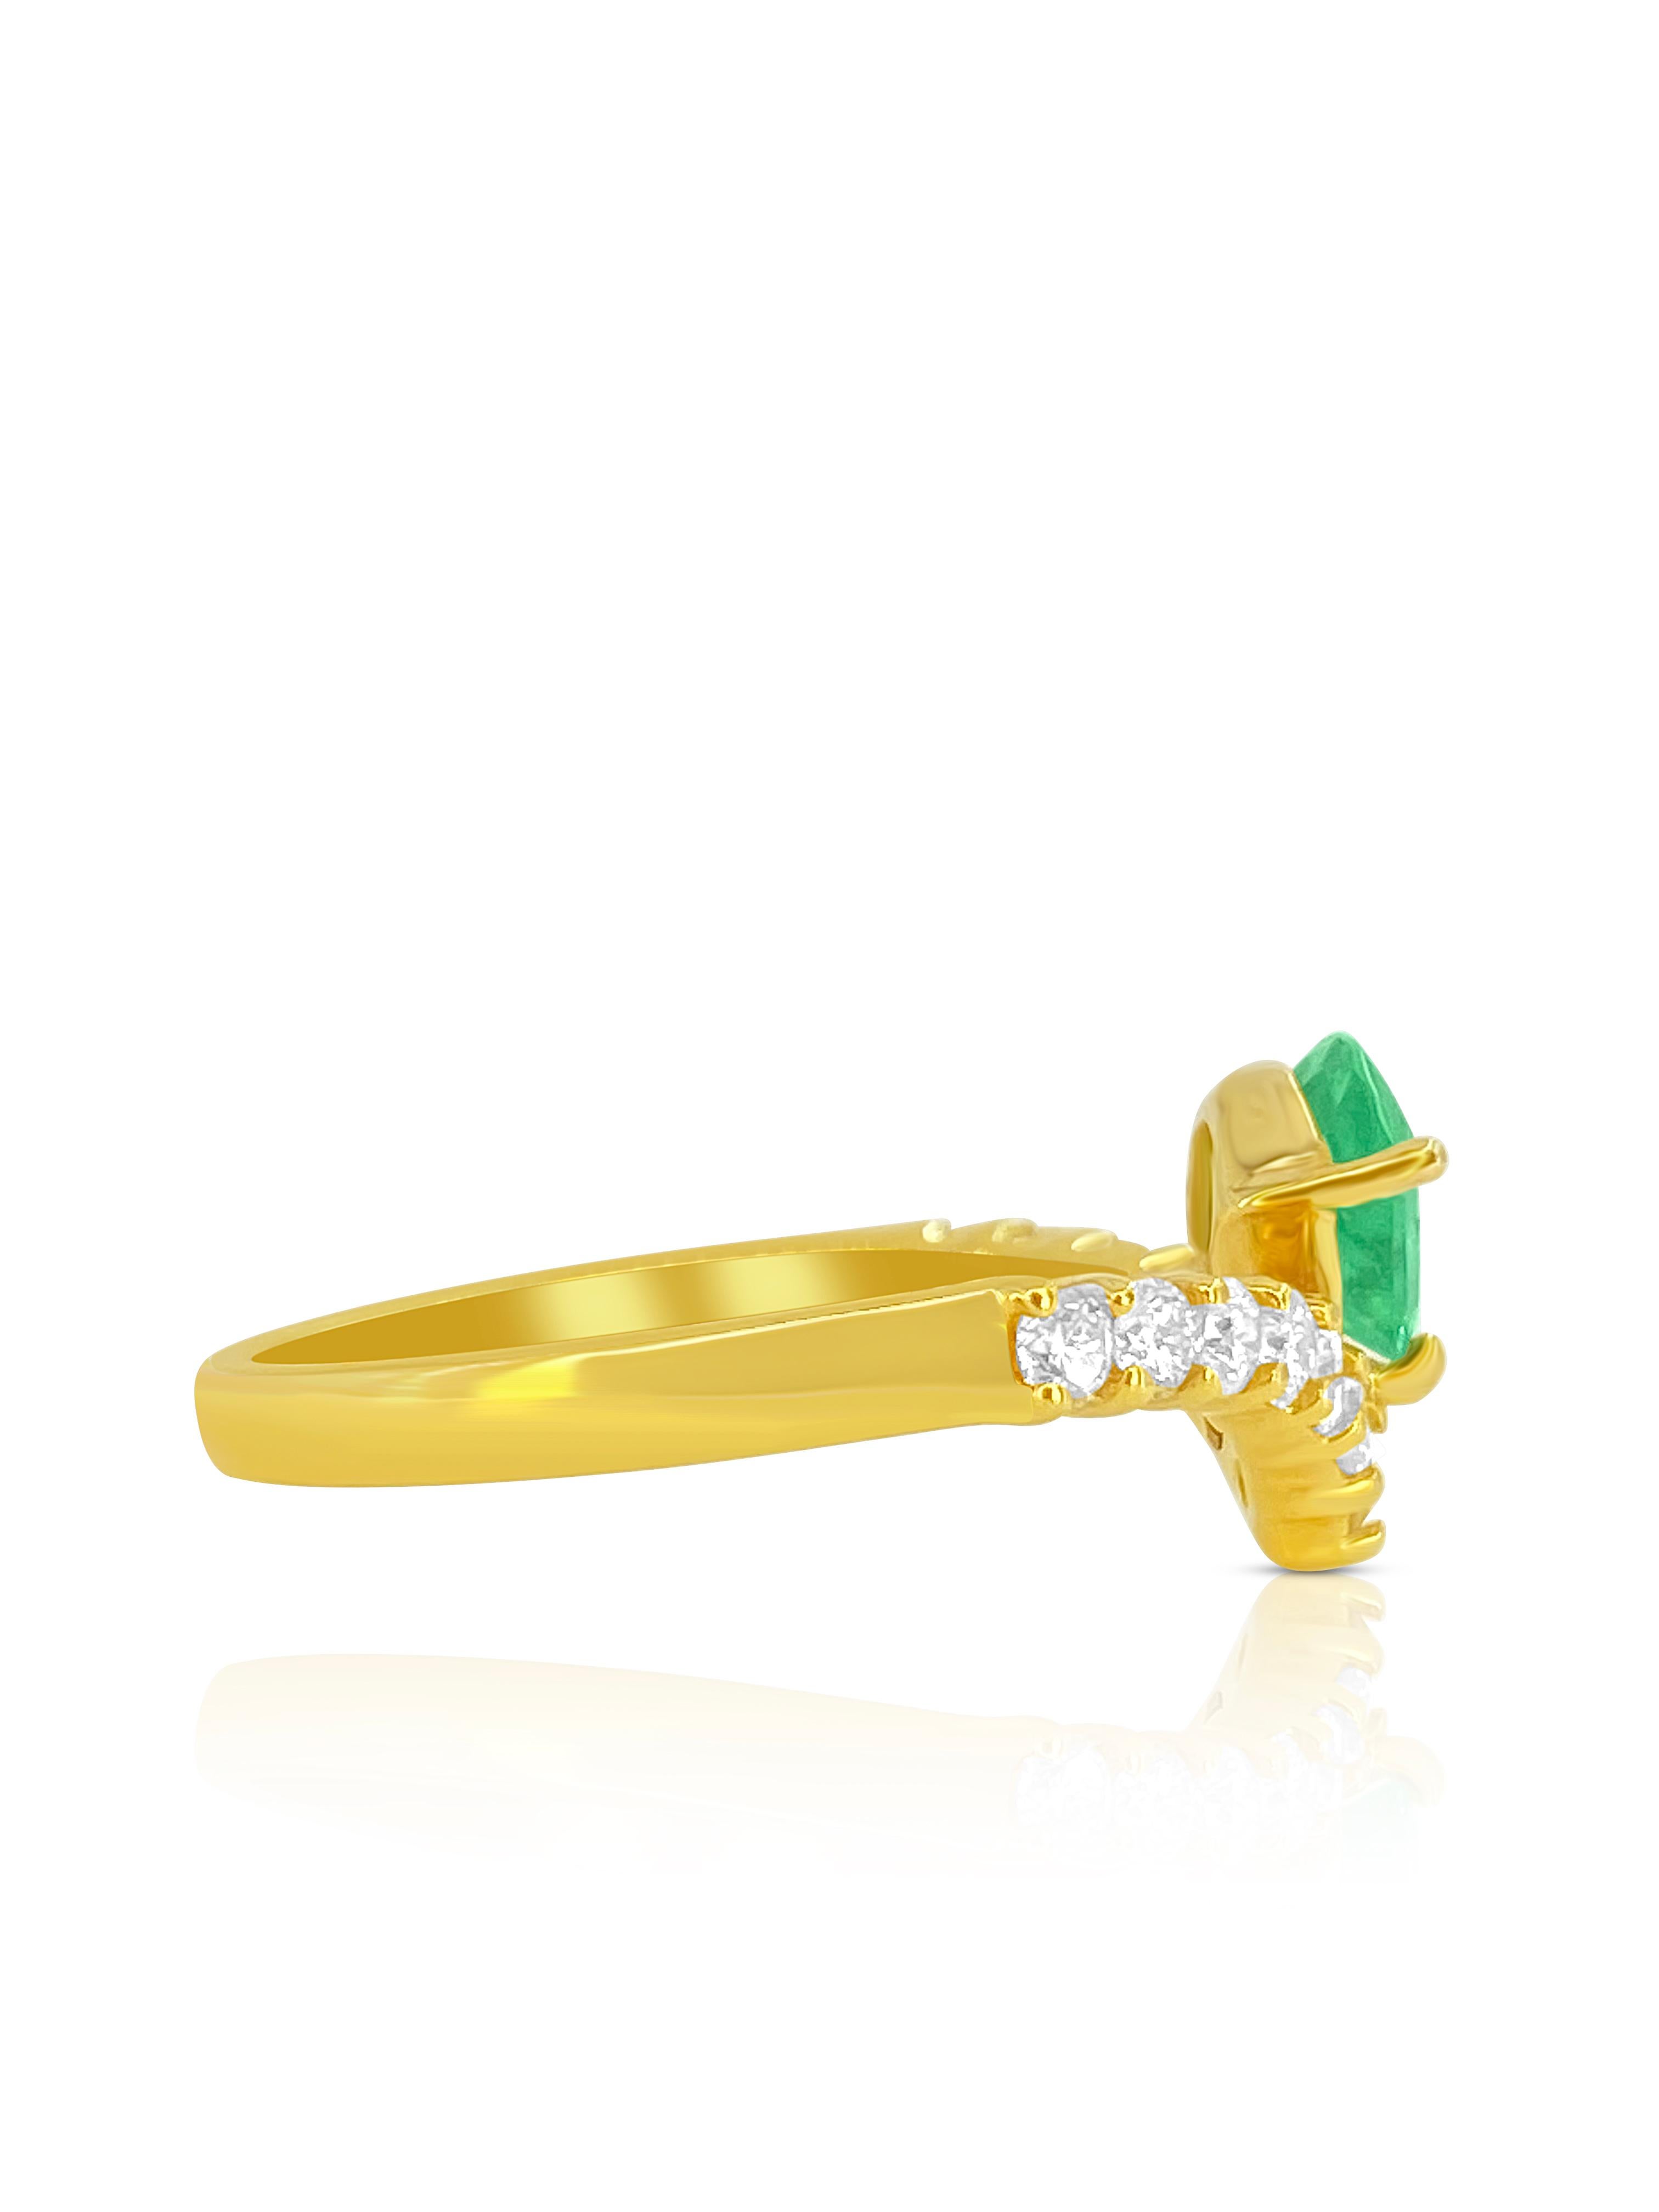 Unique kite shape natural Colombian Emerald mounted in 18k gold and set on a curved regal band with luminous natural diamonds. This gorgeous Nouveau ring has art deco inspirations and was handmade by our in-house jewelers. 
 
✔ Natural